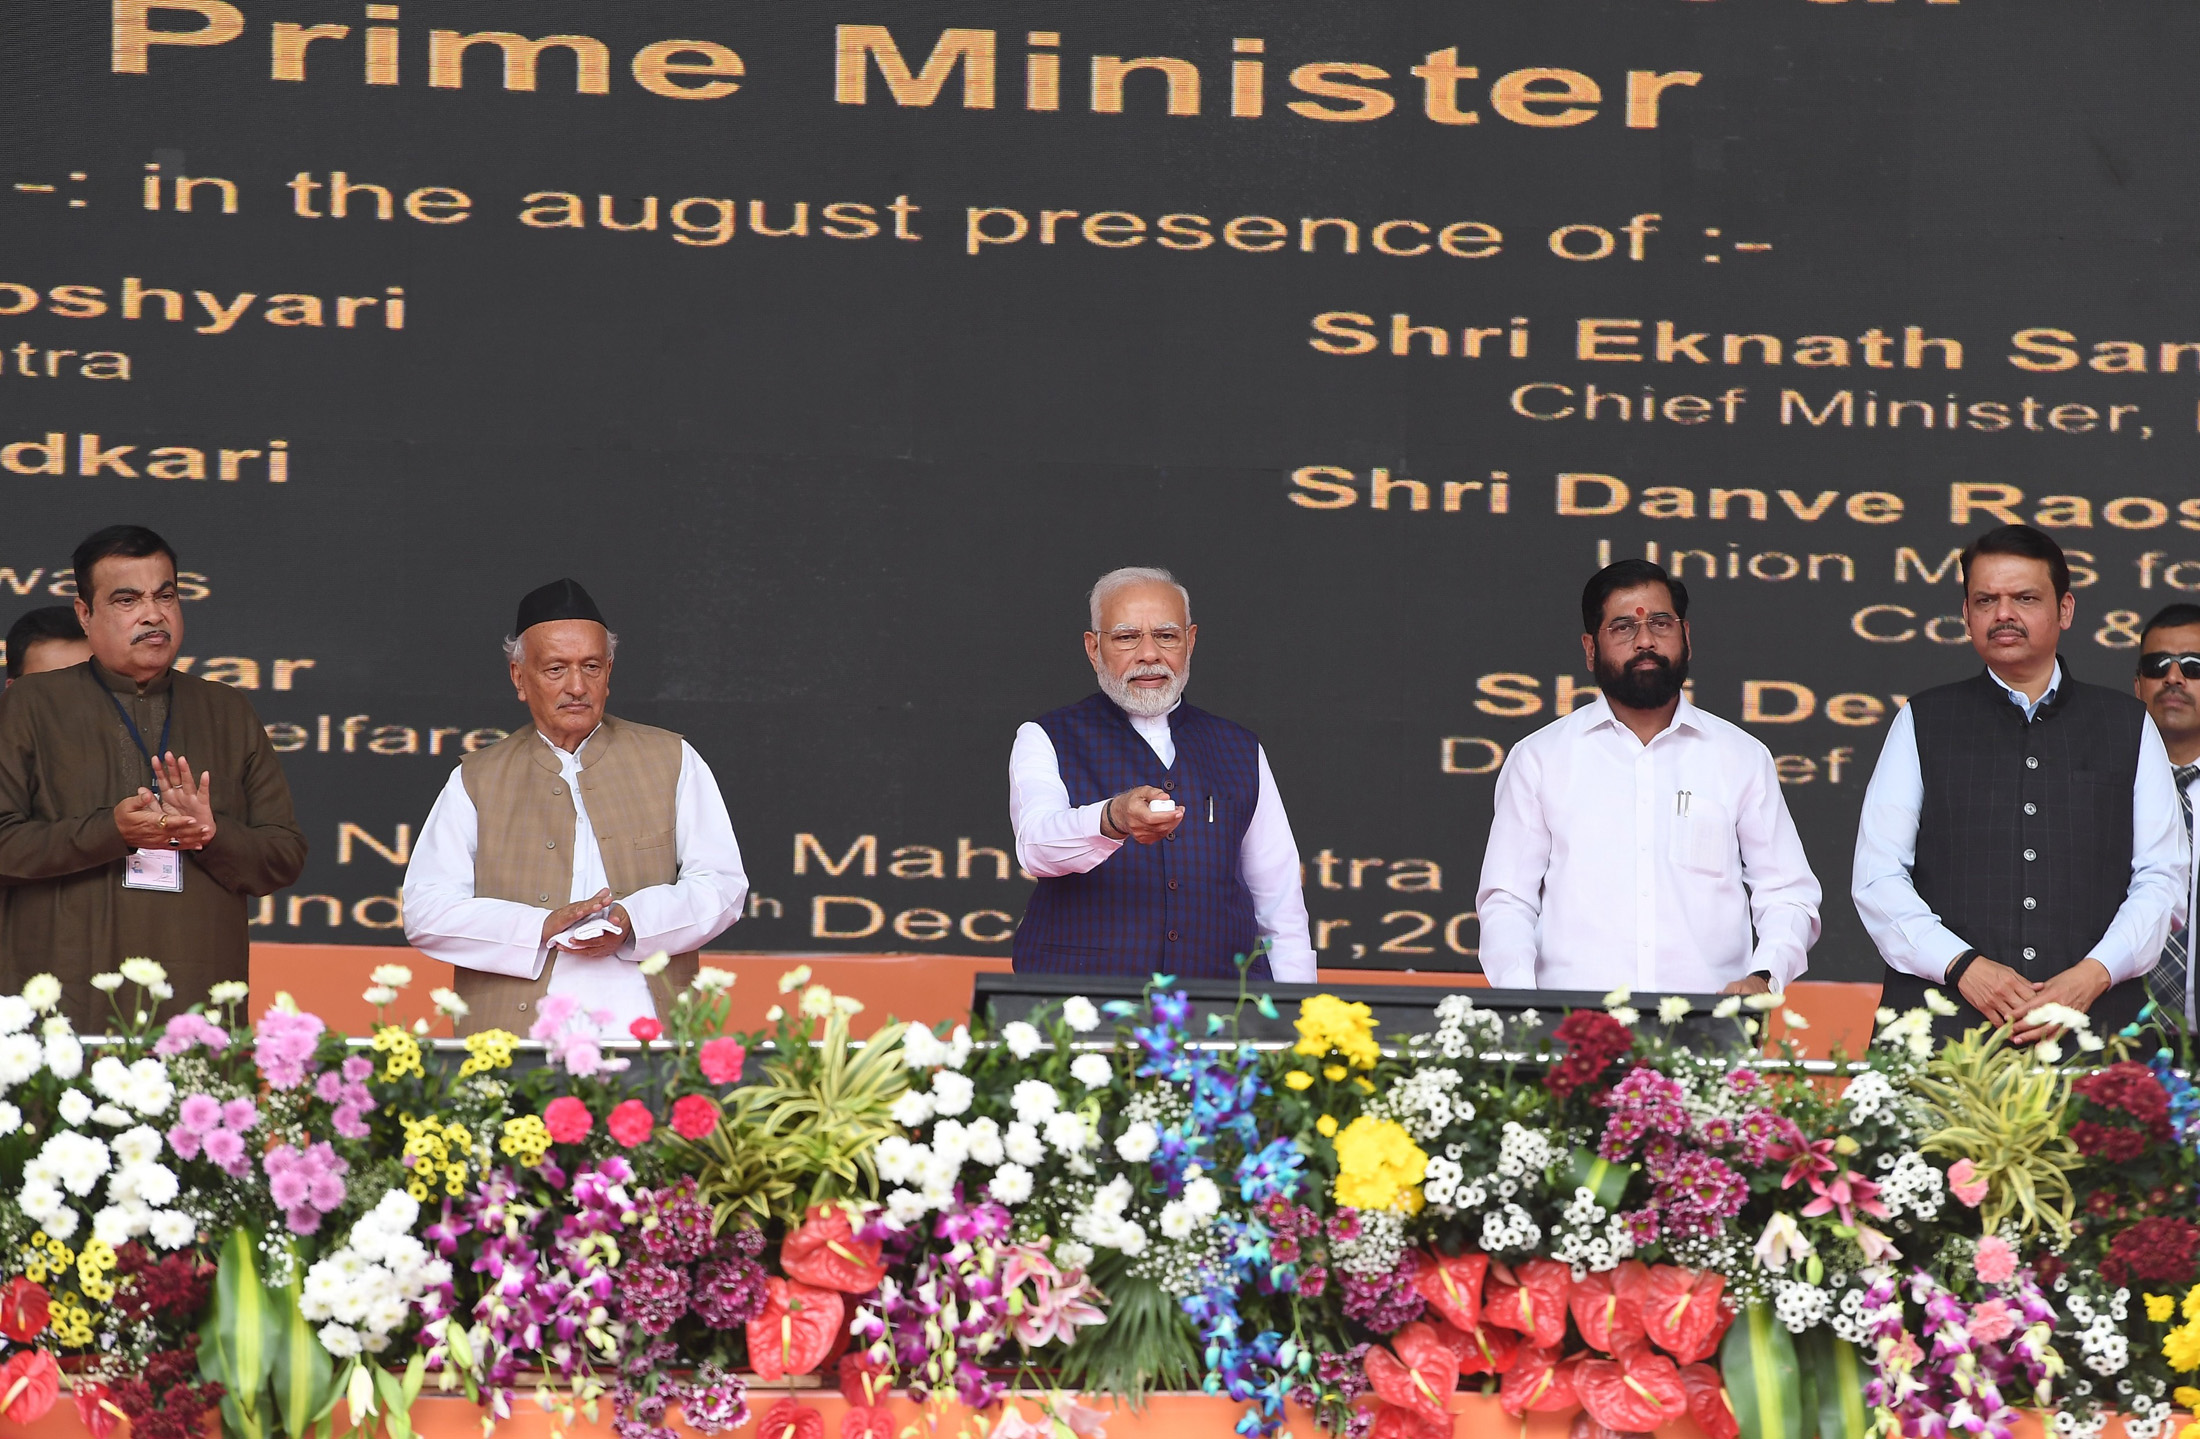 PM Modi lays foundation stone and dedicates projects worth Rs. 75,000 crores in Maharashtra